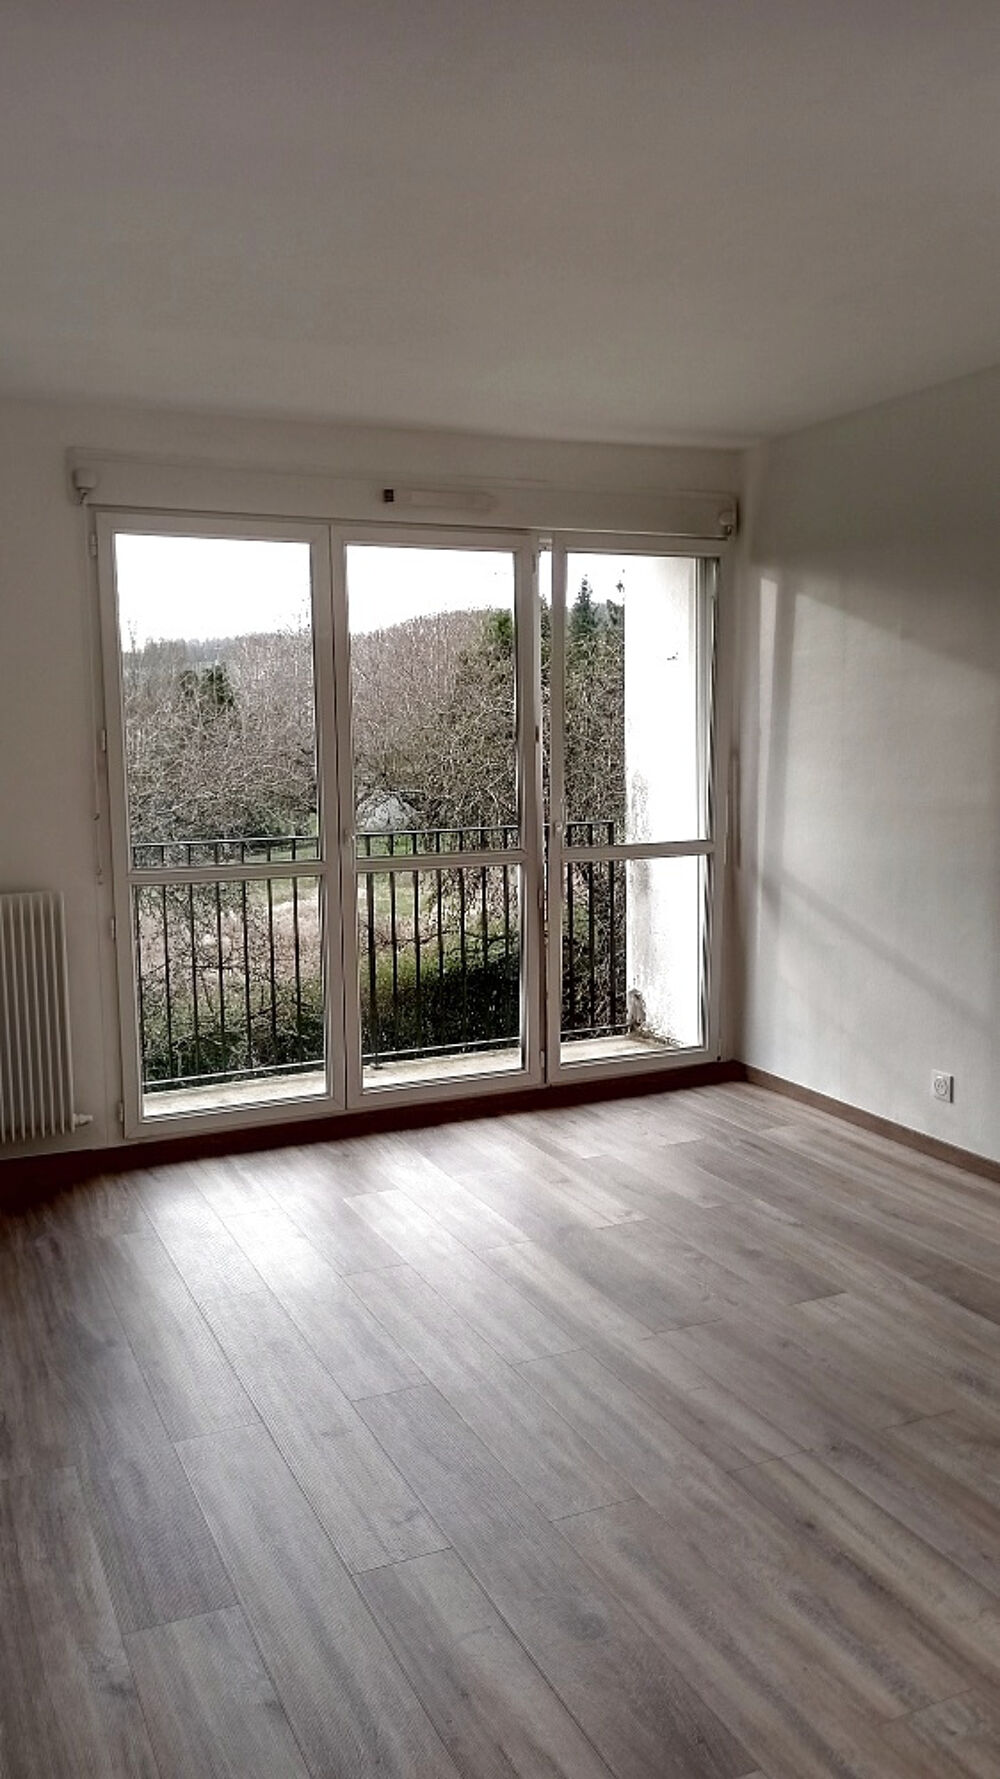 Location Appartement Appartement - 46.7 m2 -  Chteau-Thierry Chateau thierry